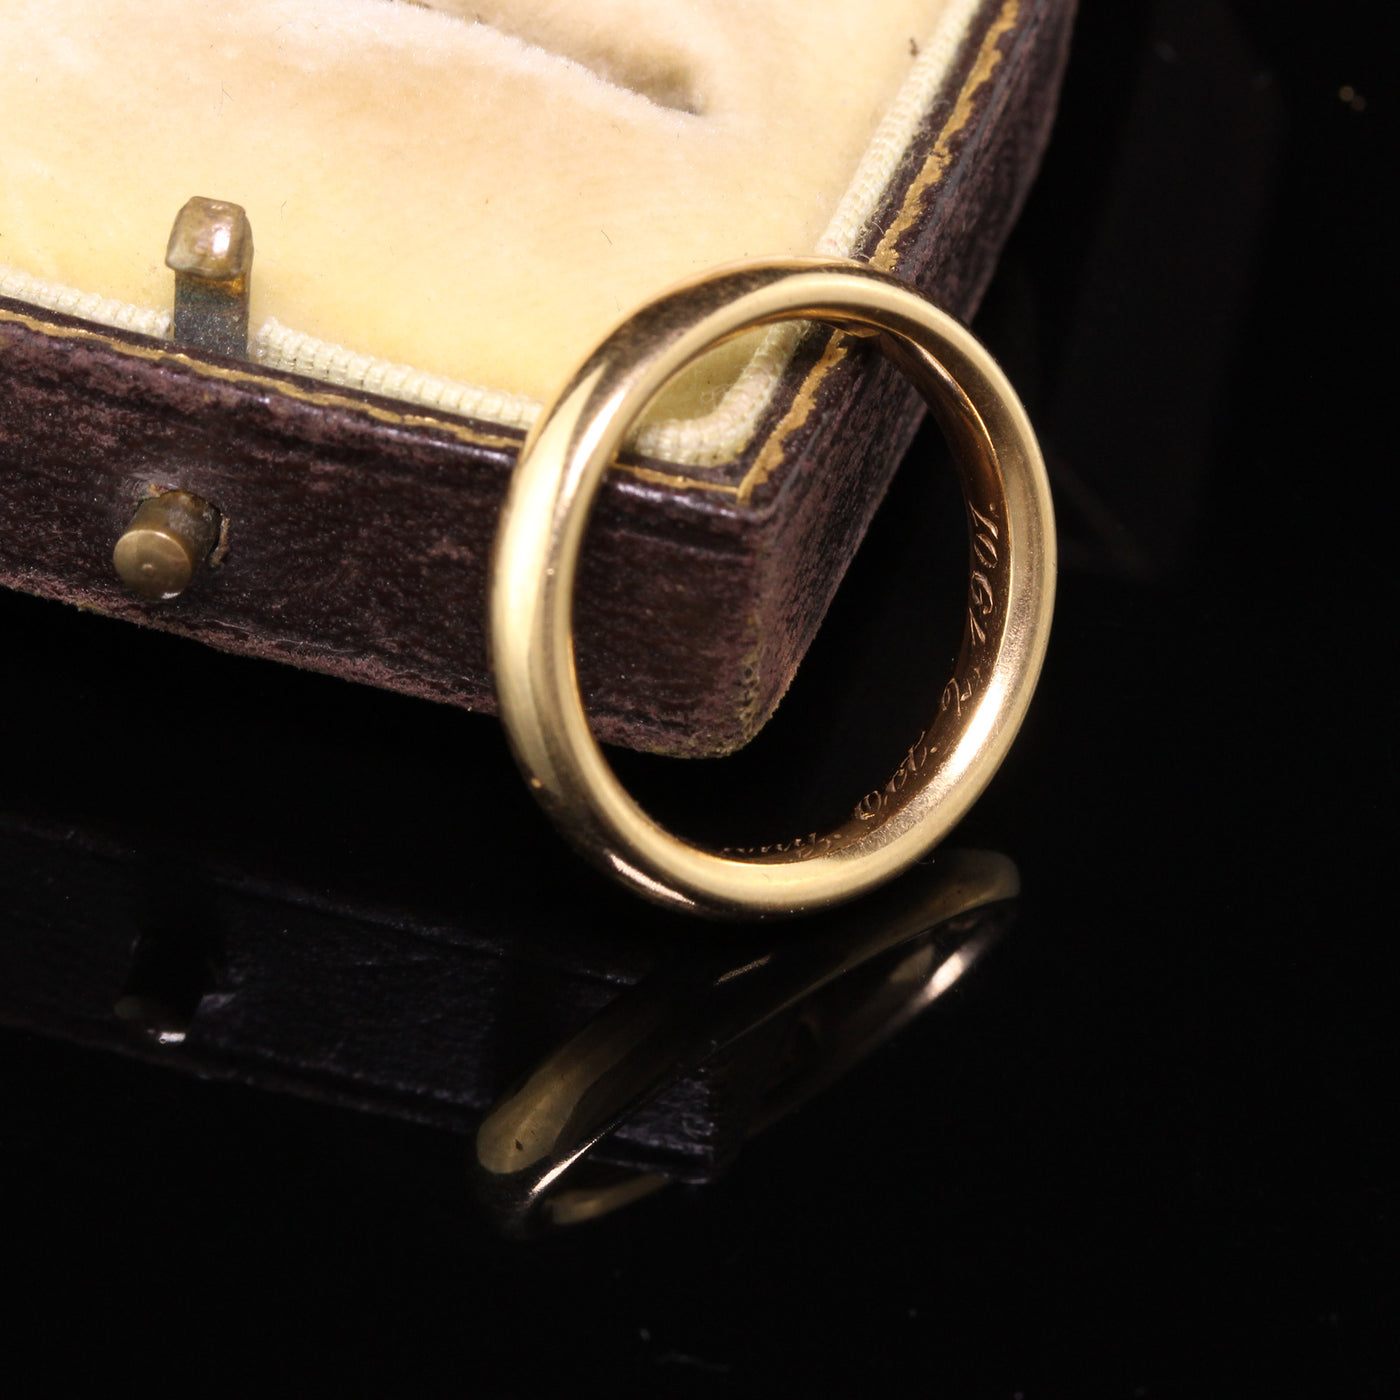 Shreve Crump and Low Antique Victorian 18K Yellow Gold Engraved 1901 Wedding Band